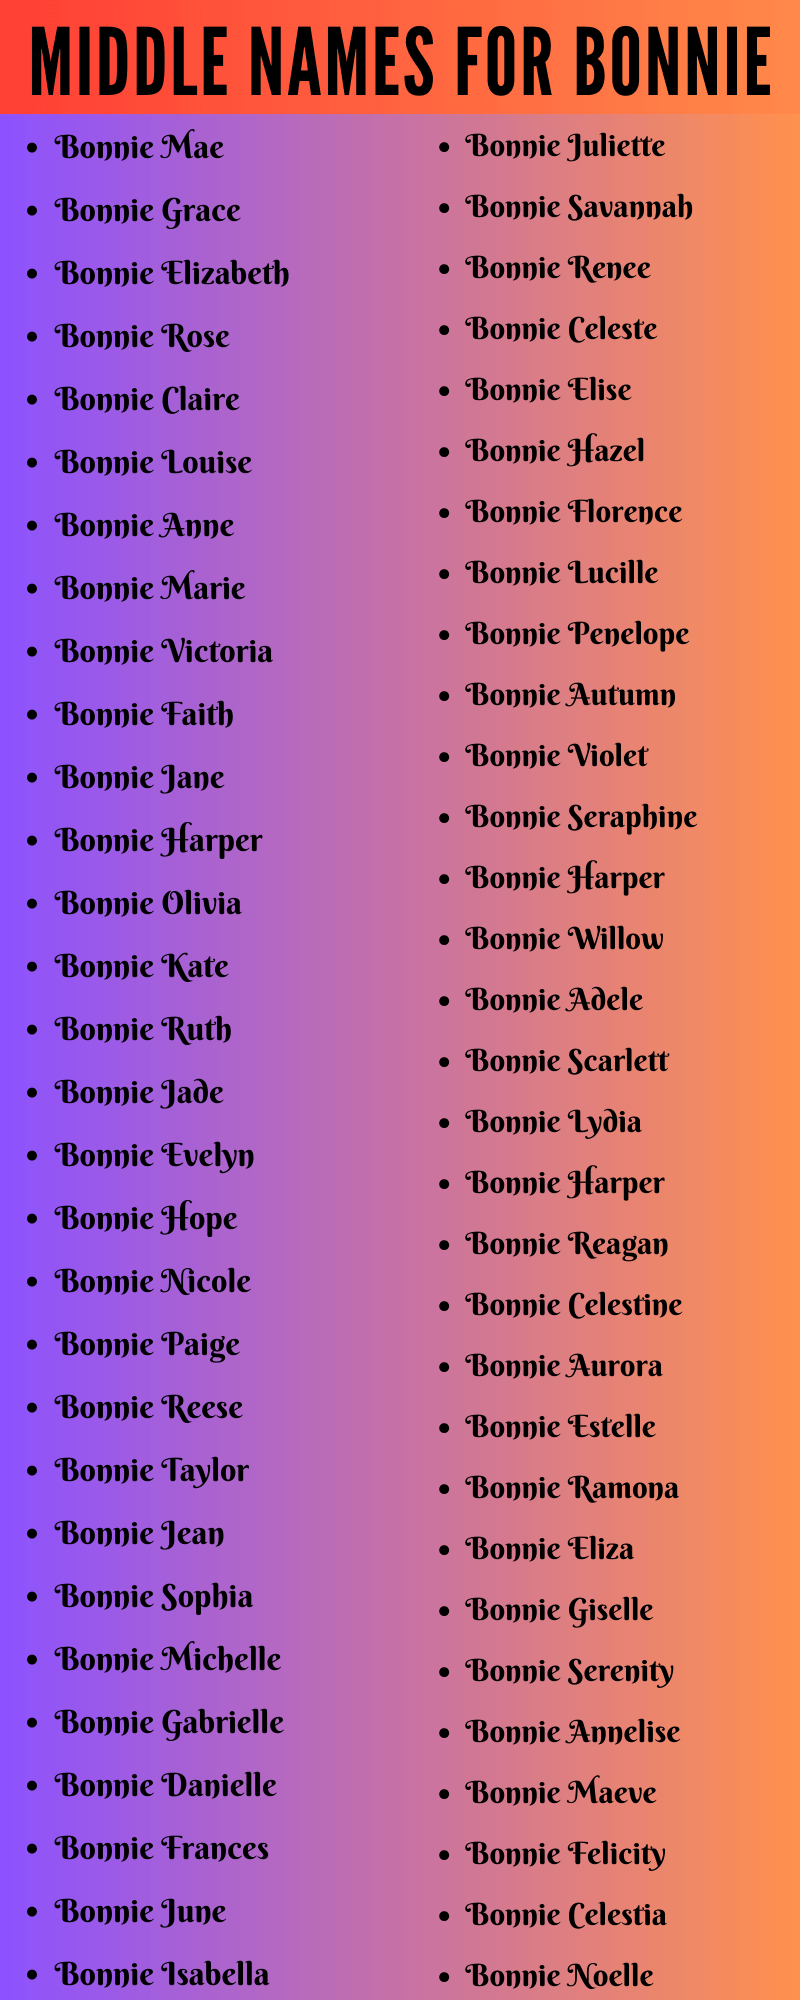 400 Best Middle Names For Bonnie